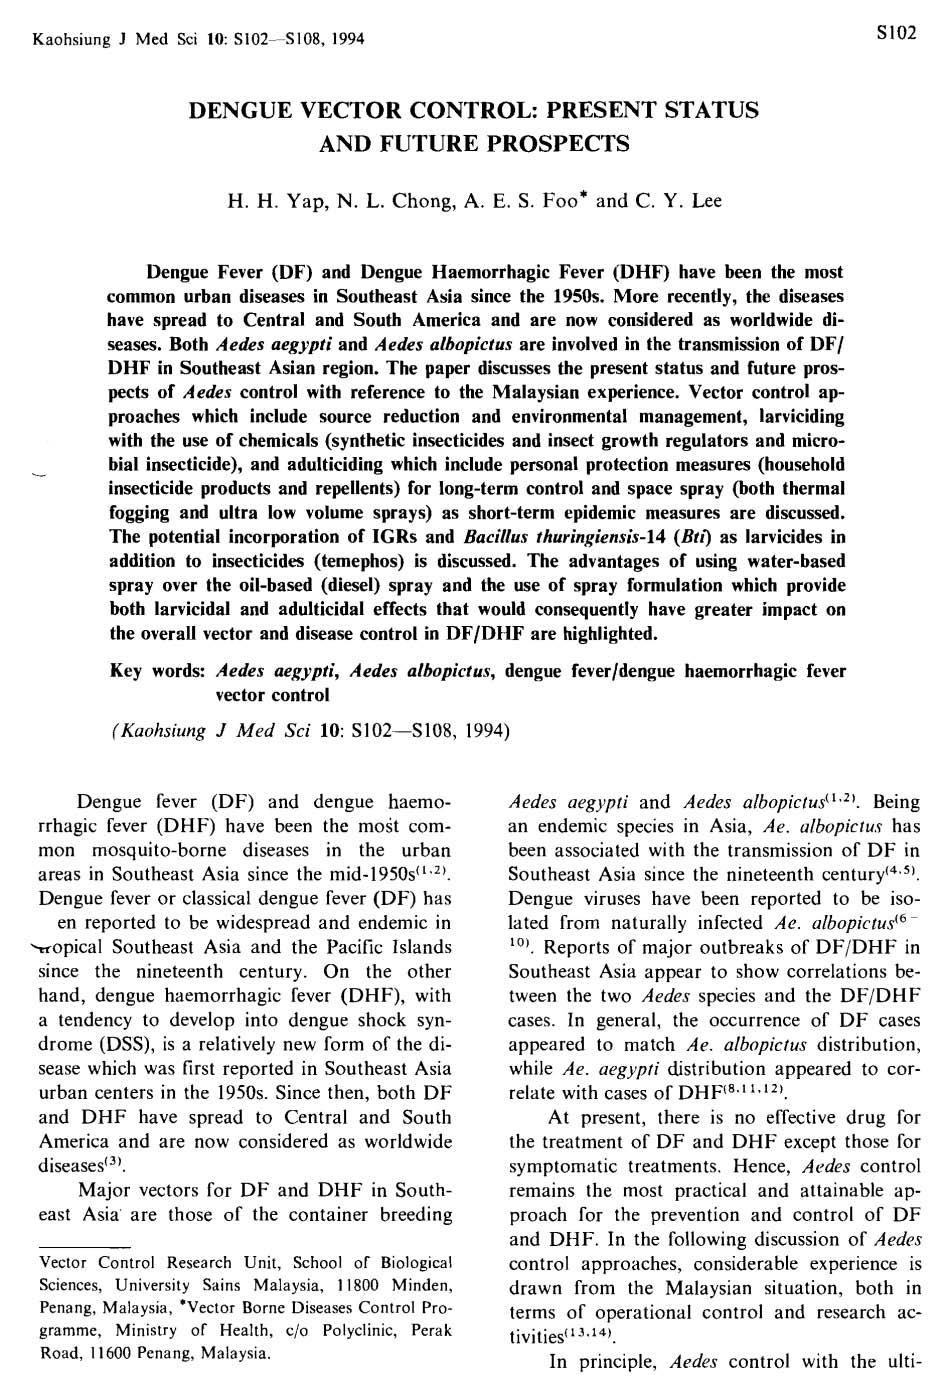 Kaohsiung J Med Sci 10: S102--Slog, 1994 DENGUE VECTOR CONTROL: PRESENT STATUS AND FUTURE PROSPECTS H. H. Ya